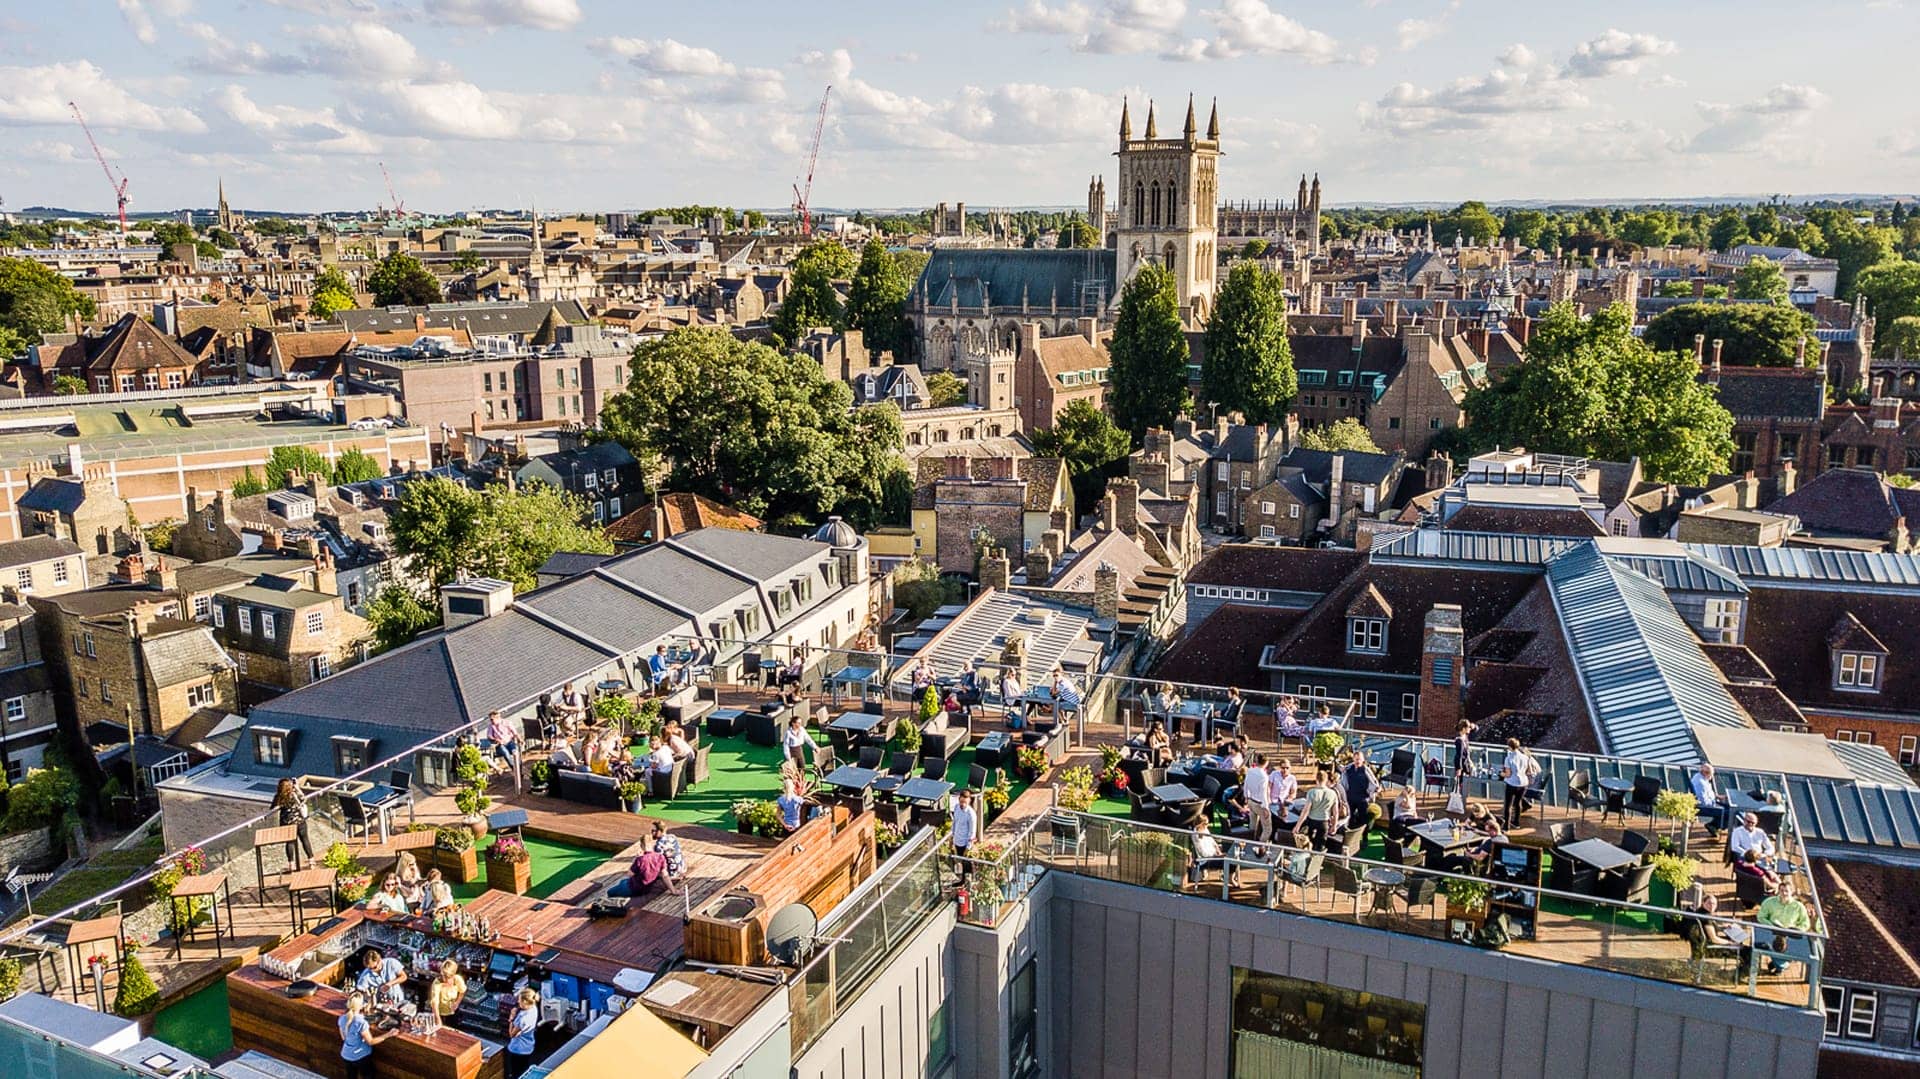 The Iconic Roof Terrace in Cambridge